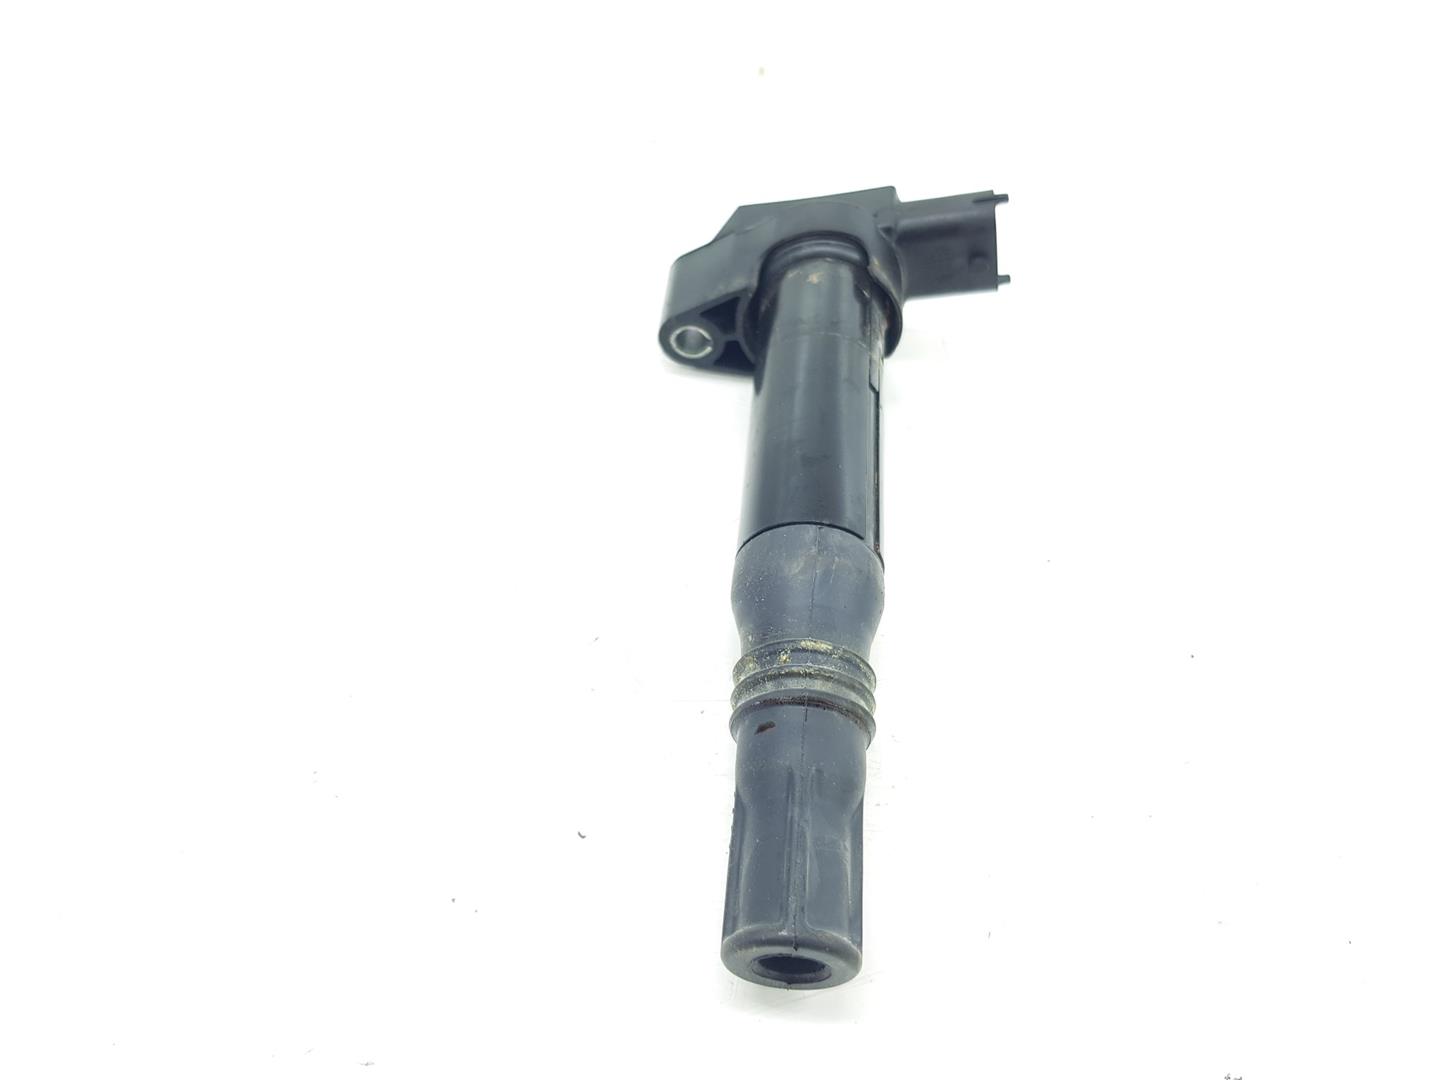 PEUGEOT 208 Peugeot 208 (2012-2015) High Voltage Ignition Coil 9671214580, 9671214580, 1111AA 25112406